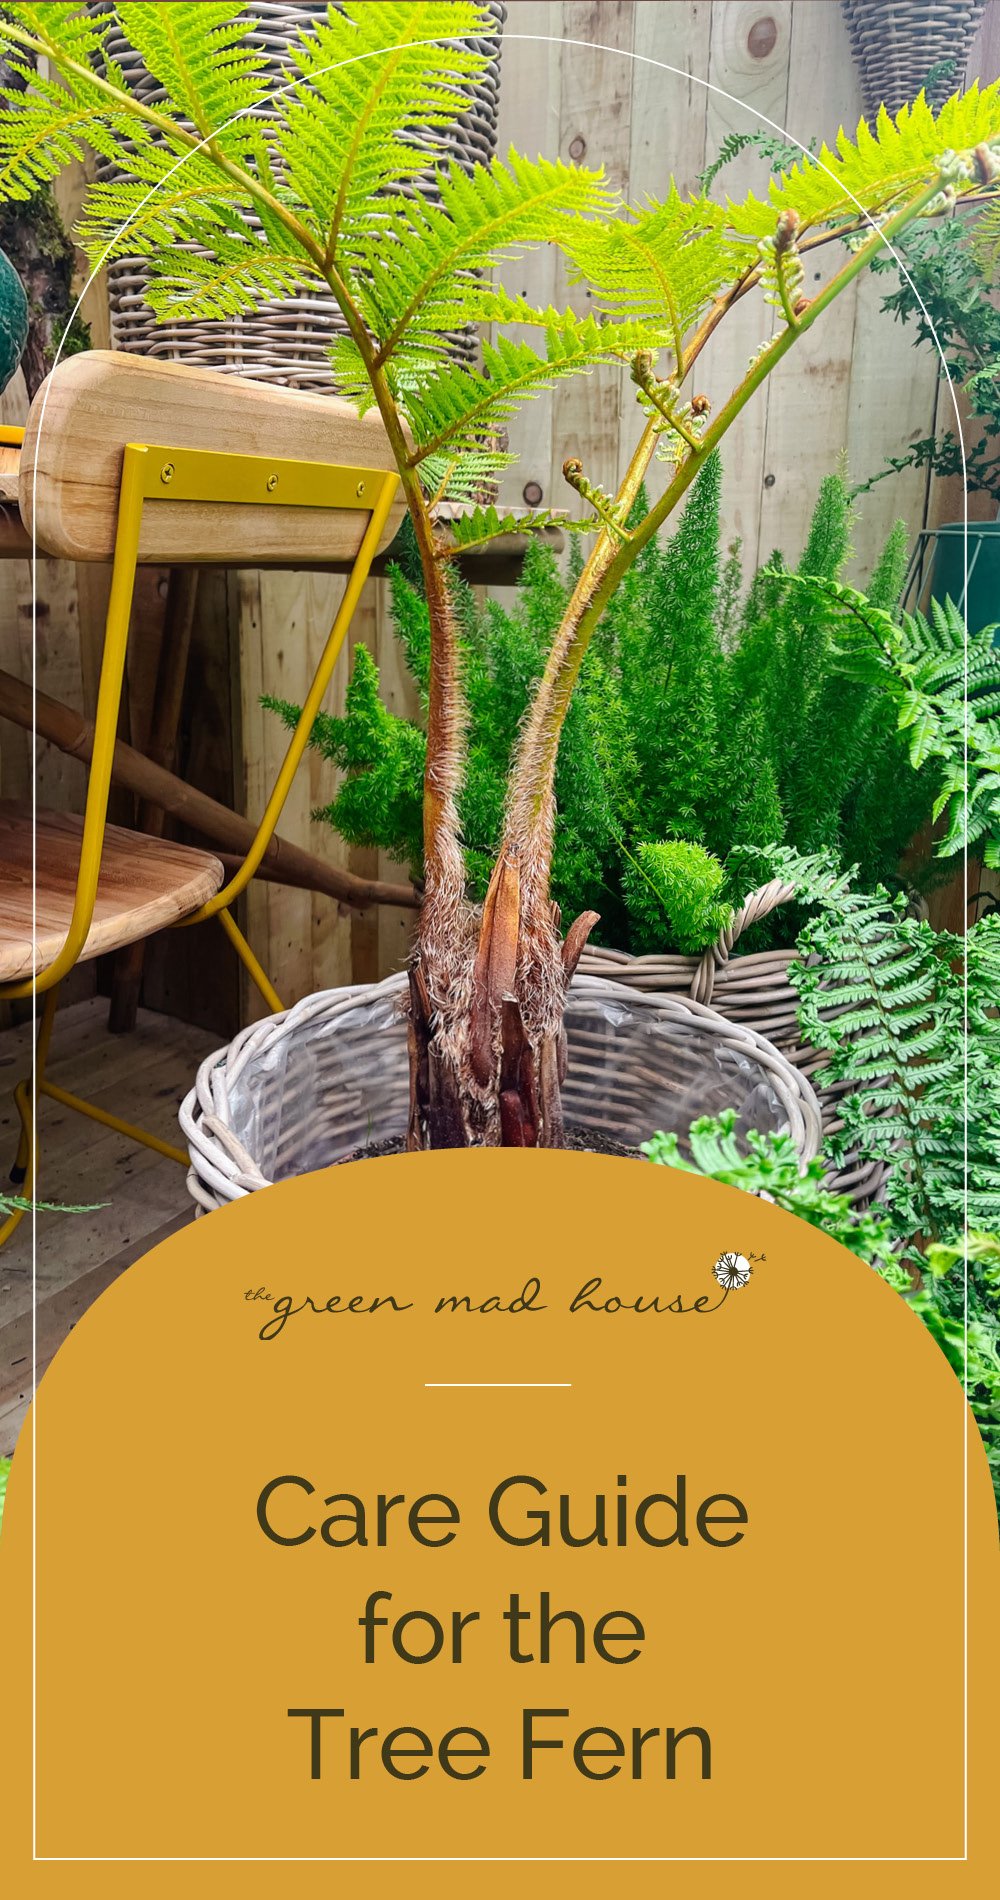 Care Guide for the Tree Fern